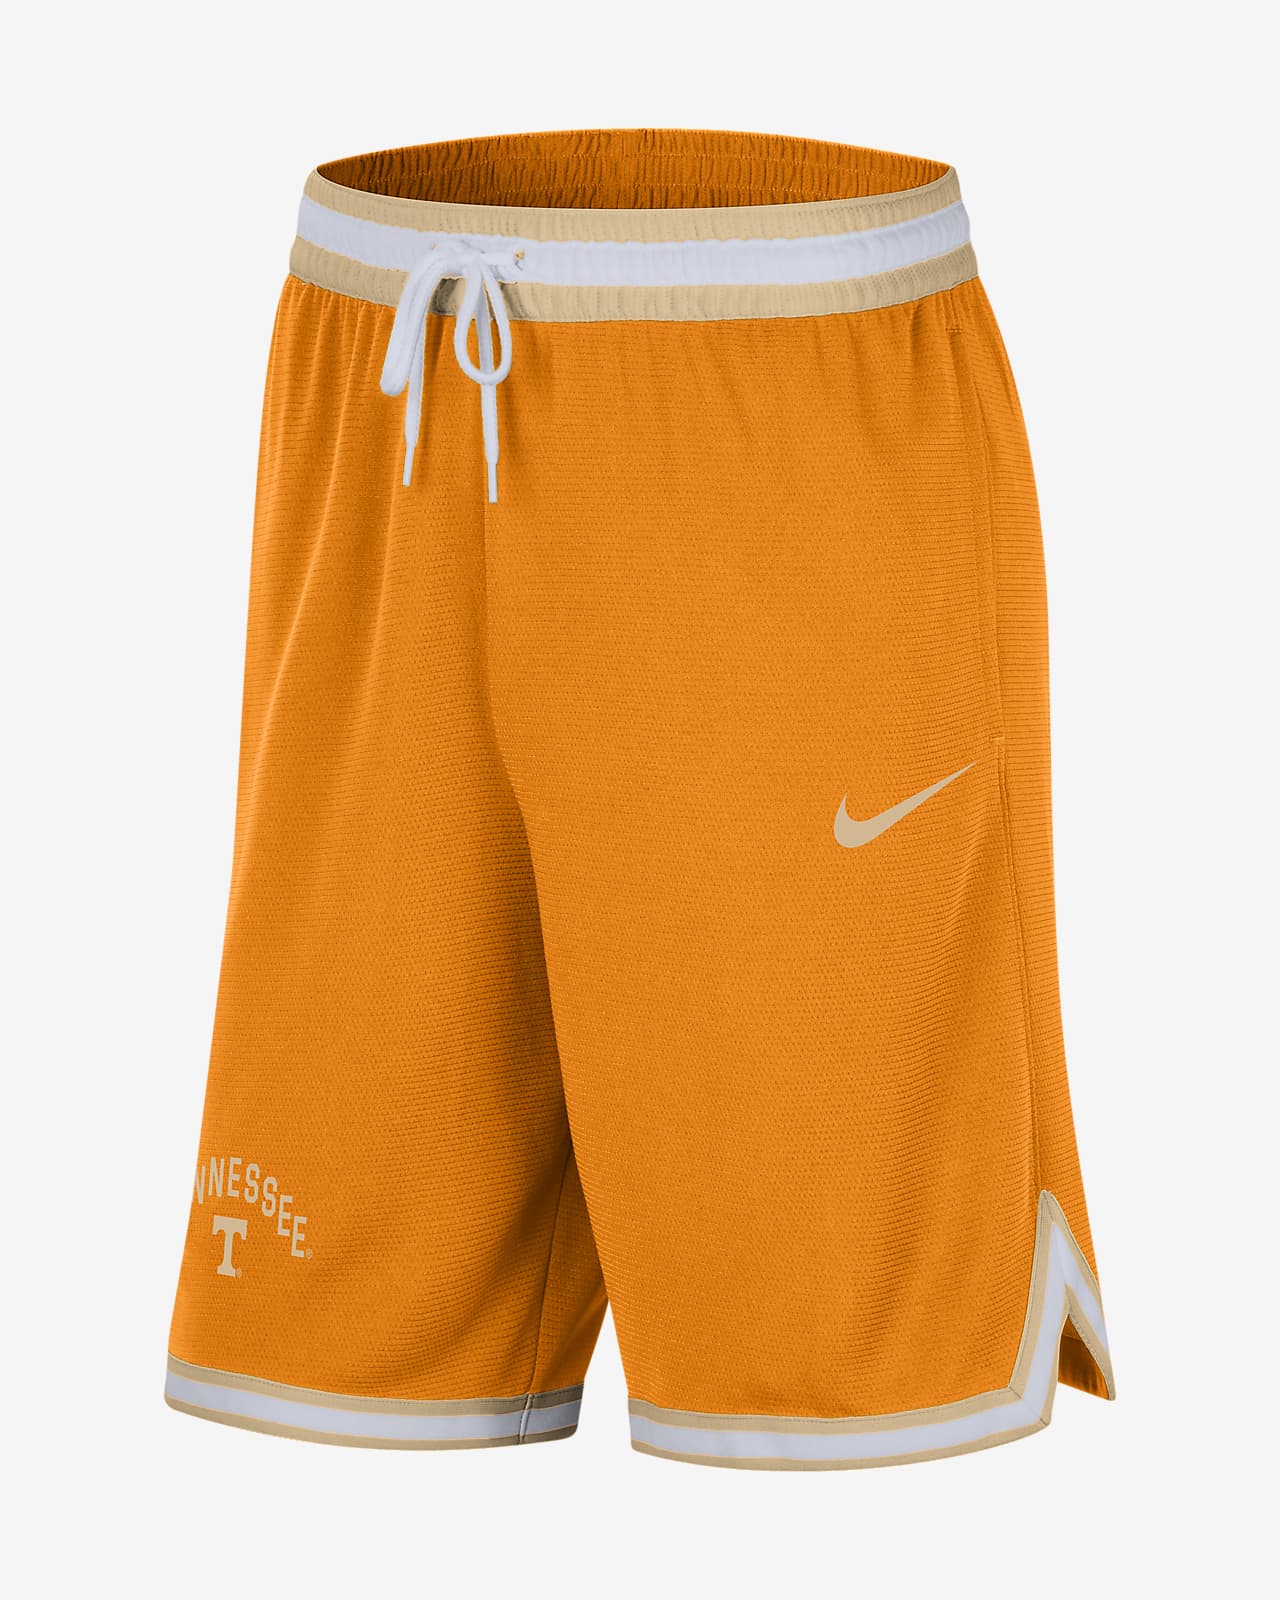 Tennessee DNA 3.0 Men's Nike Dri-FIT College Shorts